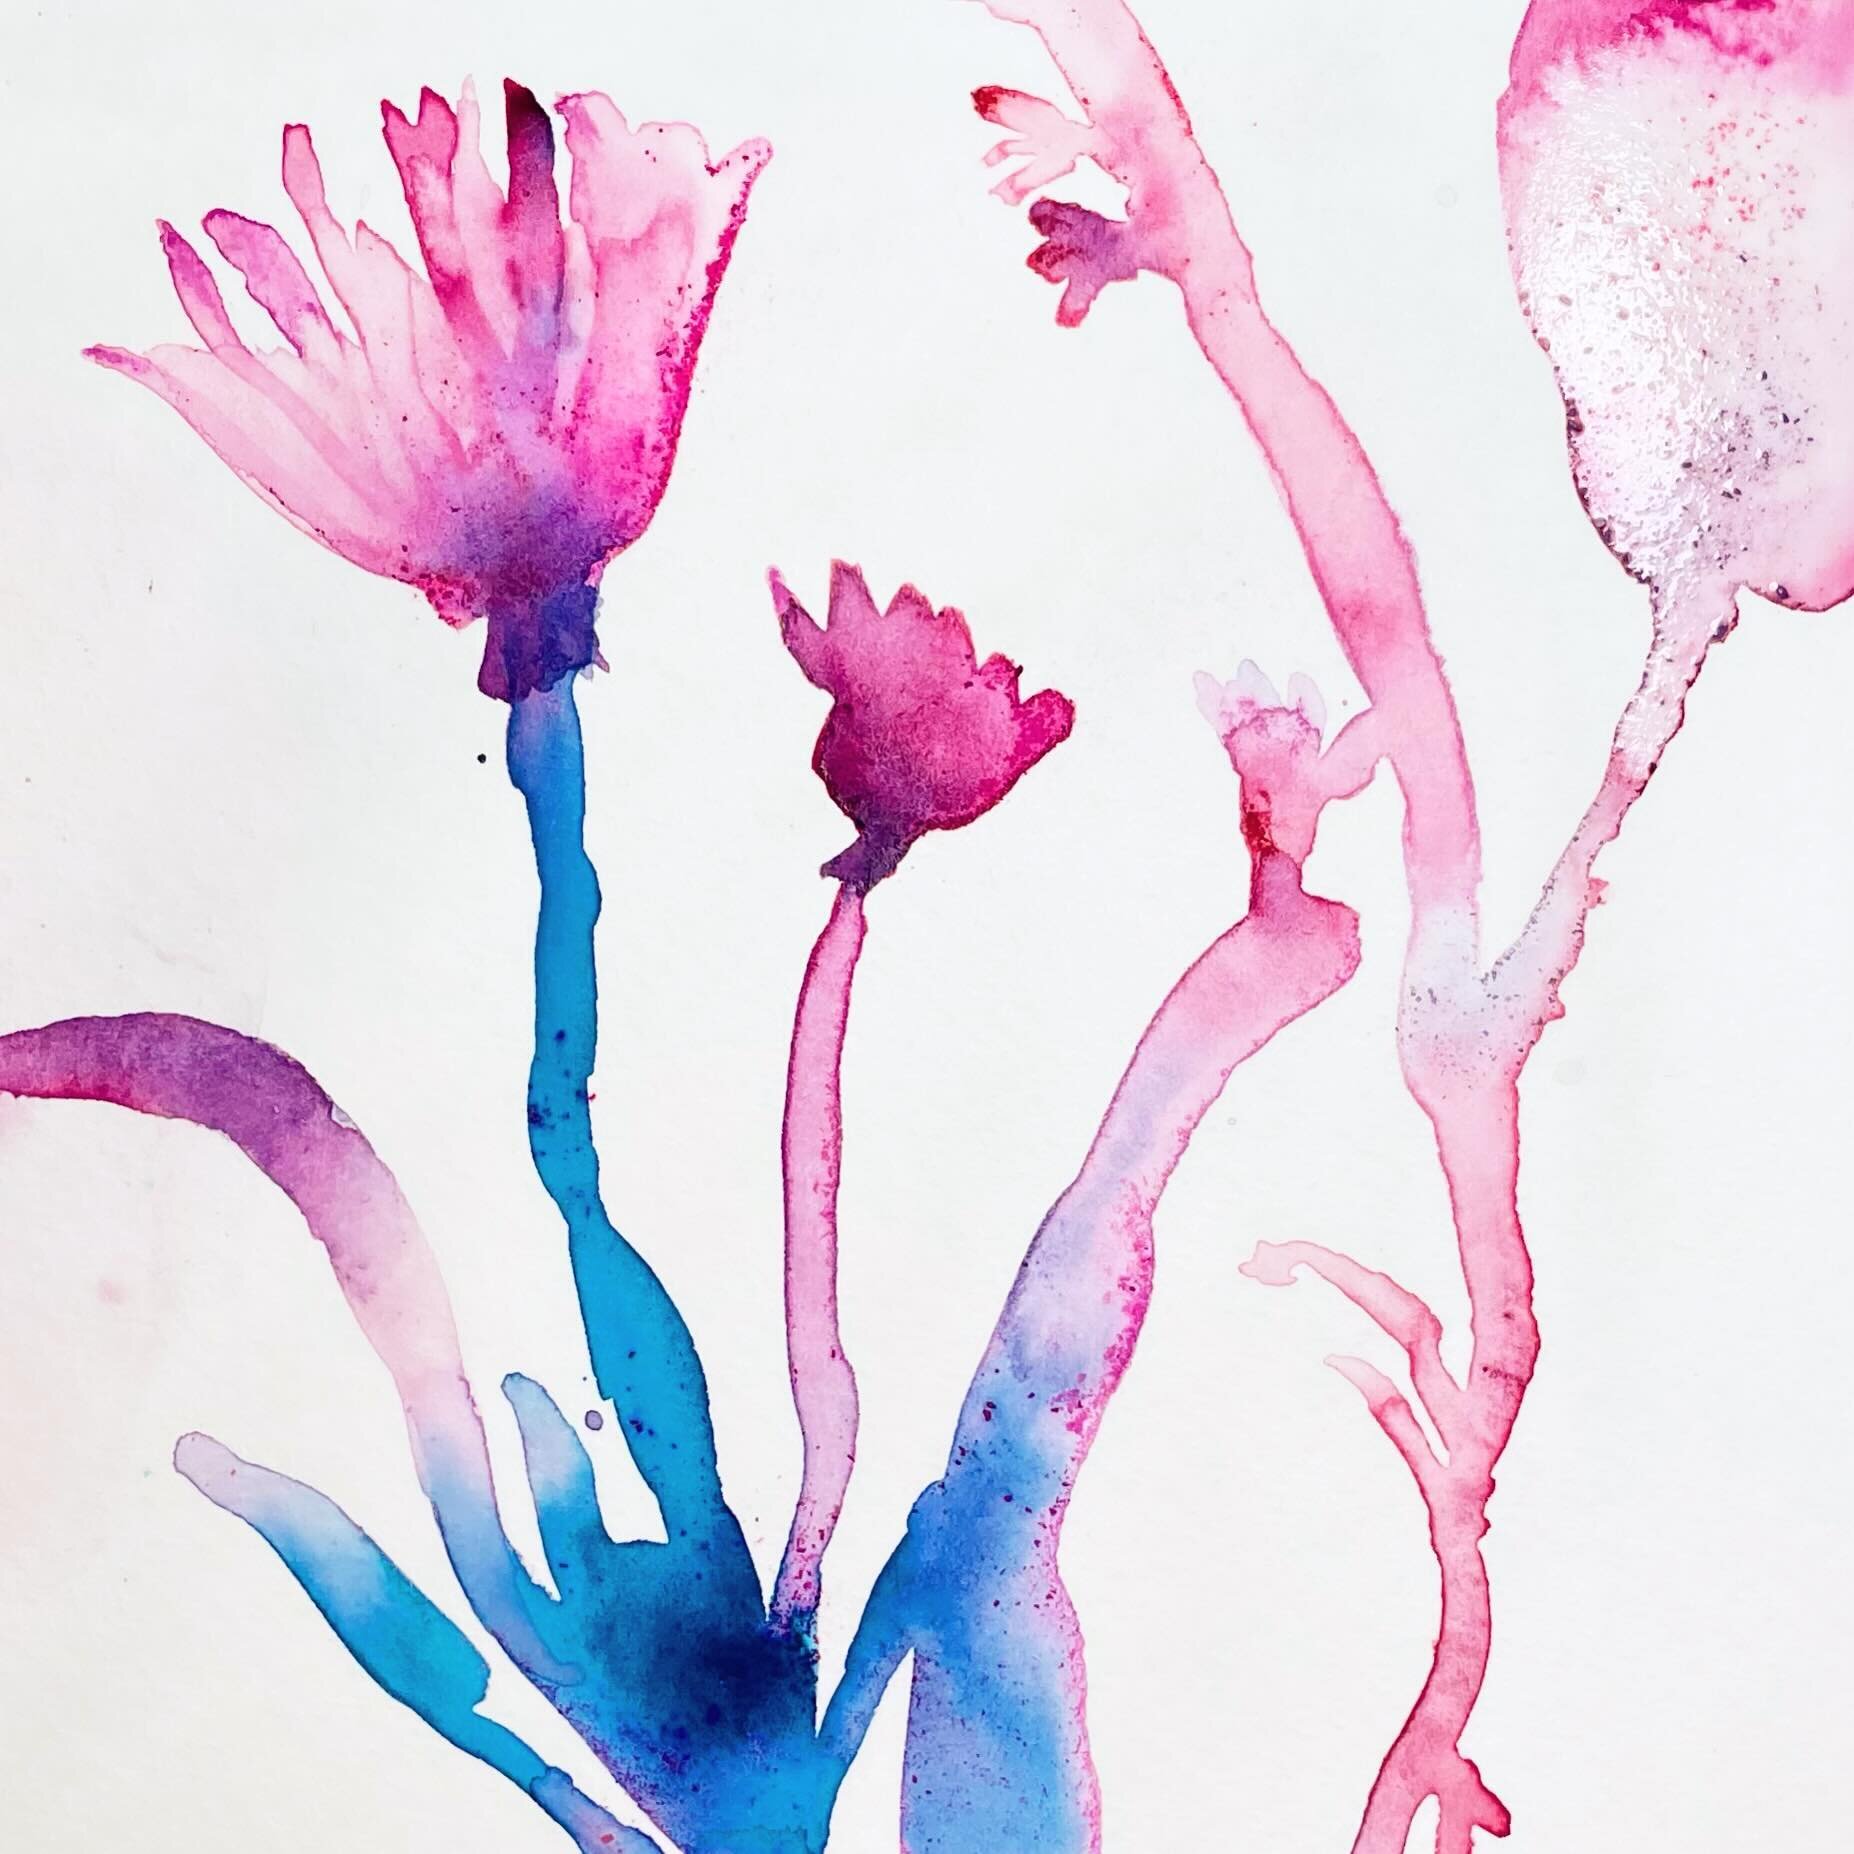 Today&rsquo;s post: floral study with pastel chalk. Messing around with mixing inks, watercolor and pastels. 
#pinks #pinkflowers #pinkandpurple #purpleflorals #pinkflorals #pinkwatercolor #watercolorflowers #watercolorflorals #botanicals #botanicala